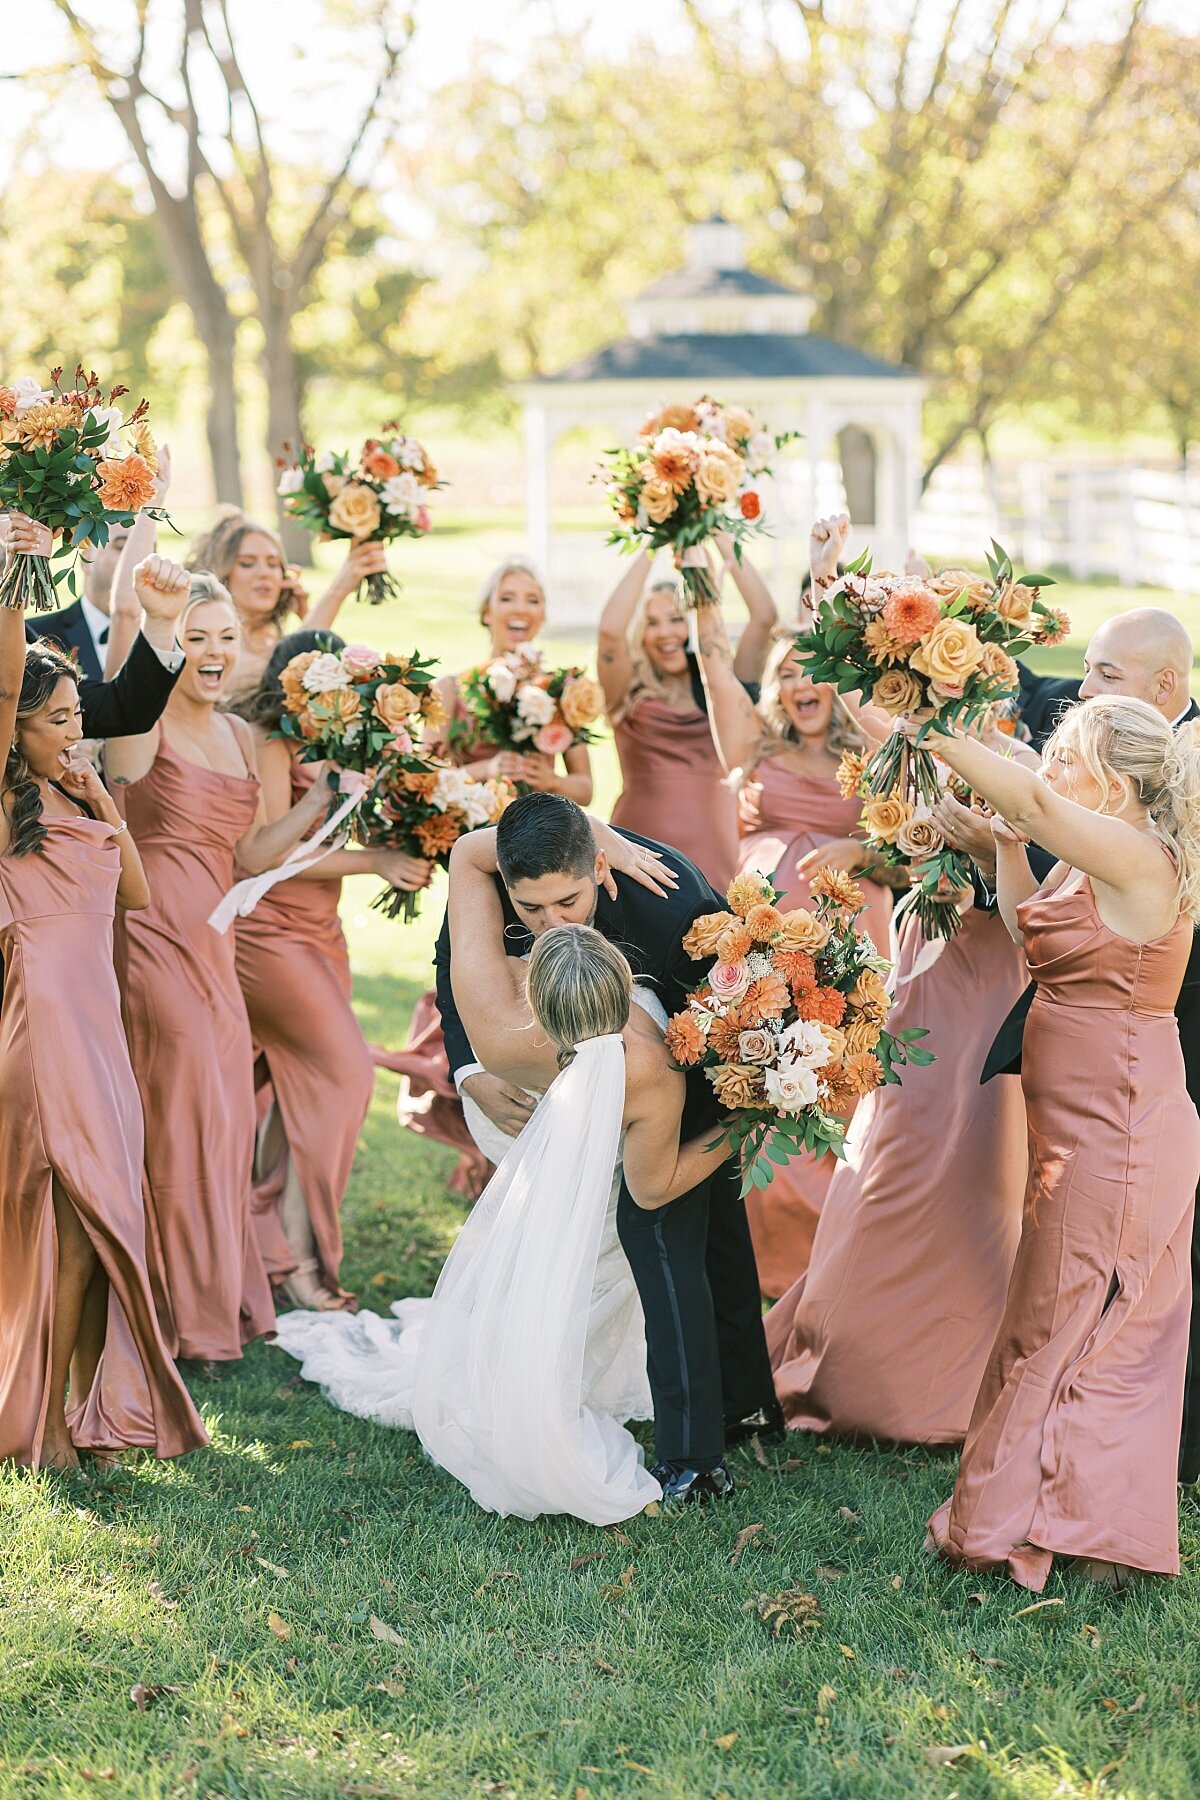 Dip kiss in front of bridal party